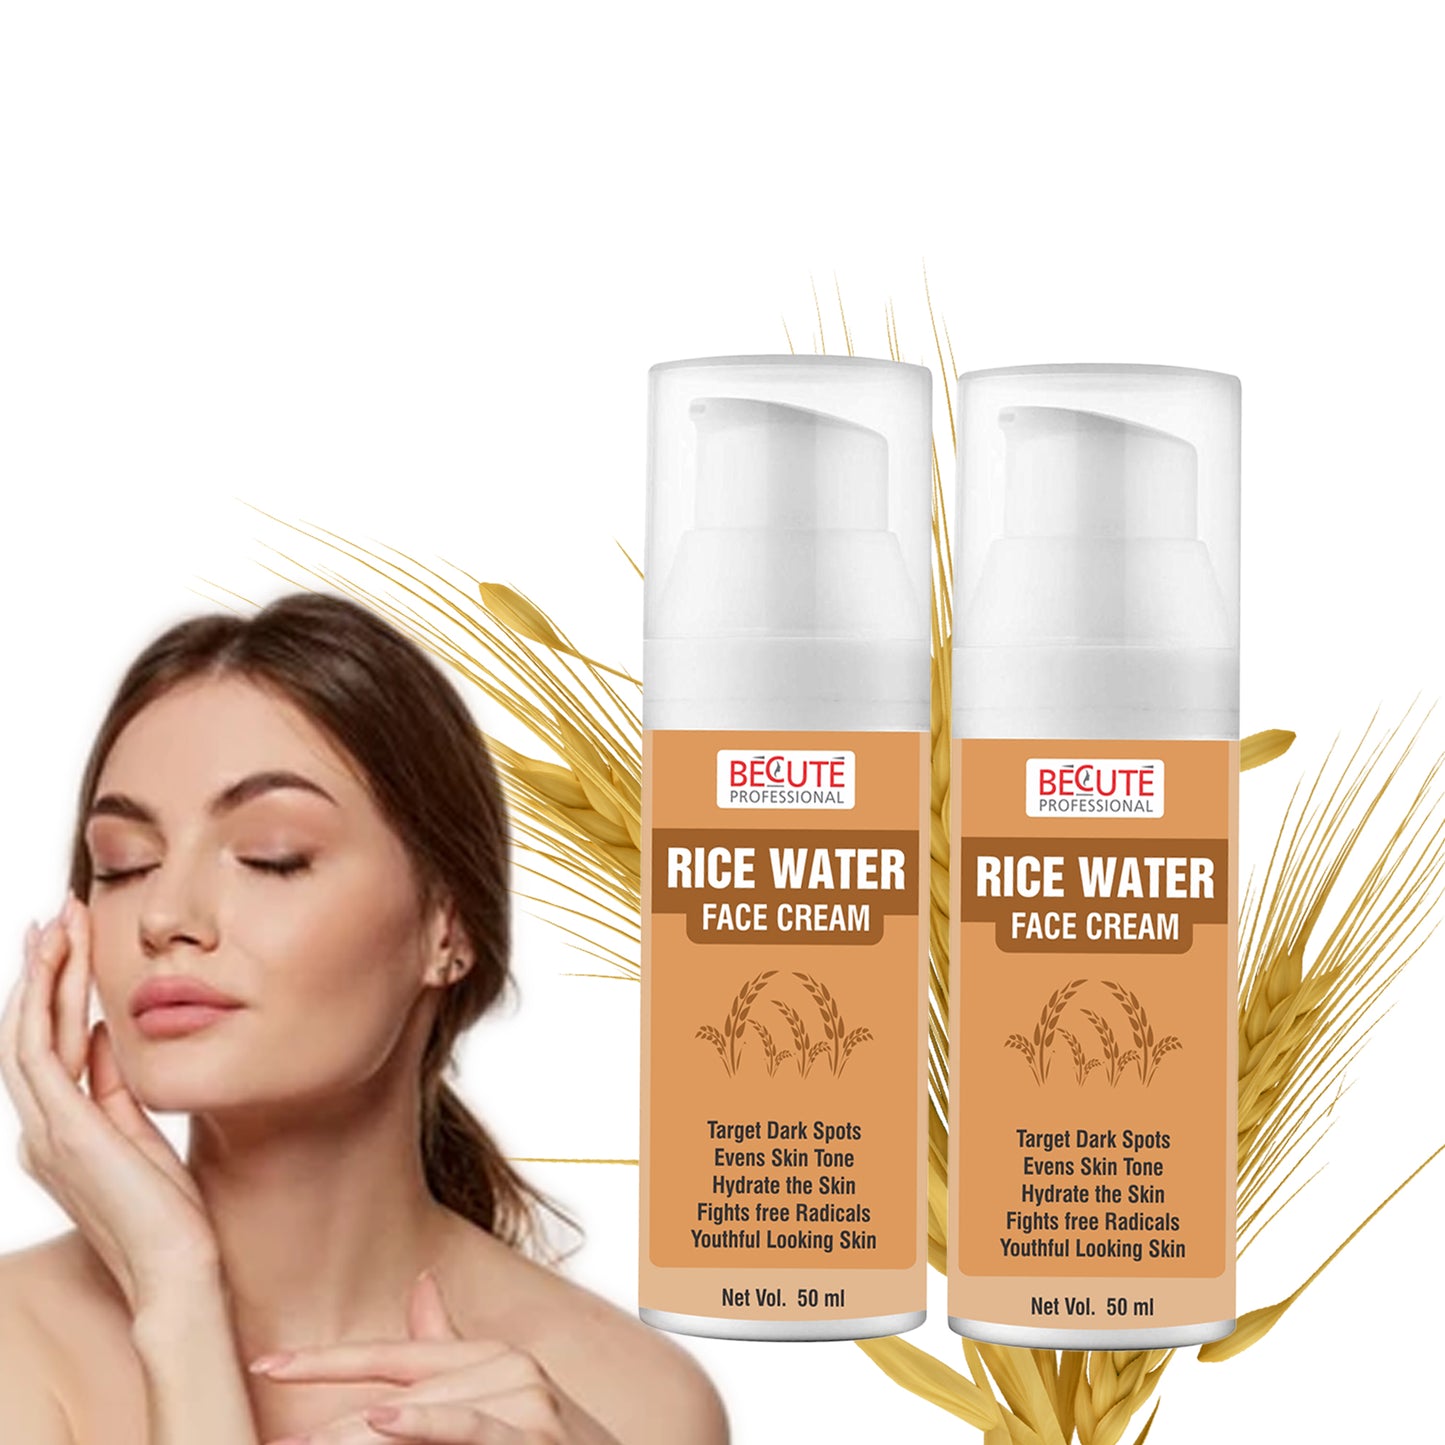 BECUTE Professional® Rice Water Face Cream for Target Dark Spots & Evens Skin Tone - Pack of 2 Pcs, 100 mL